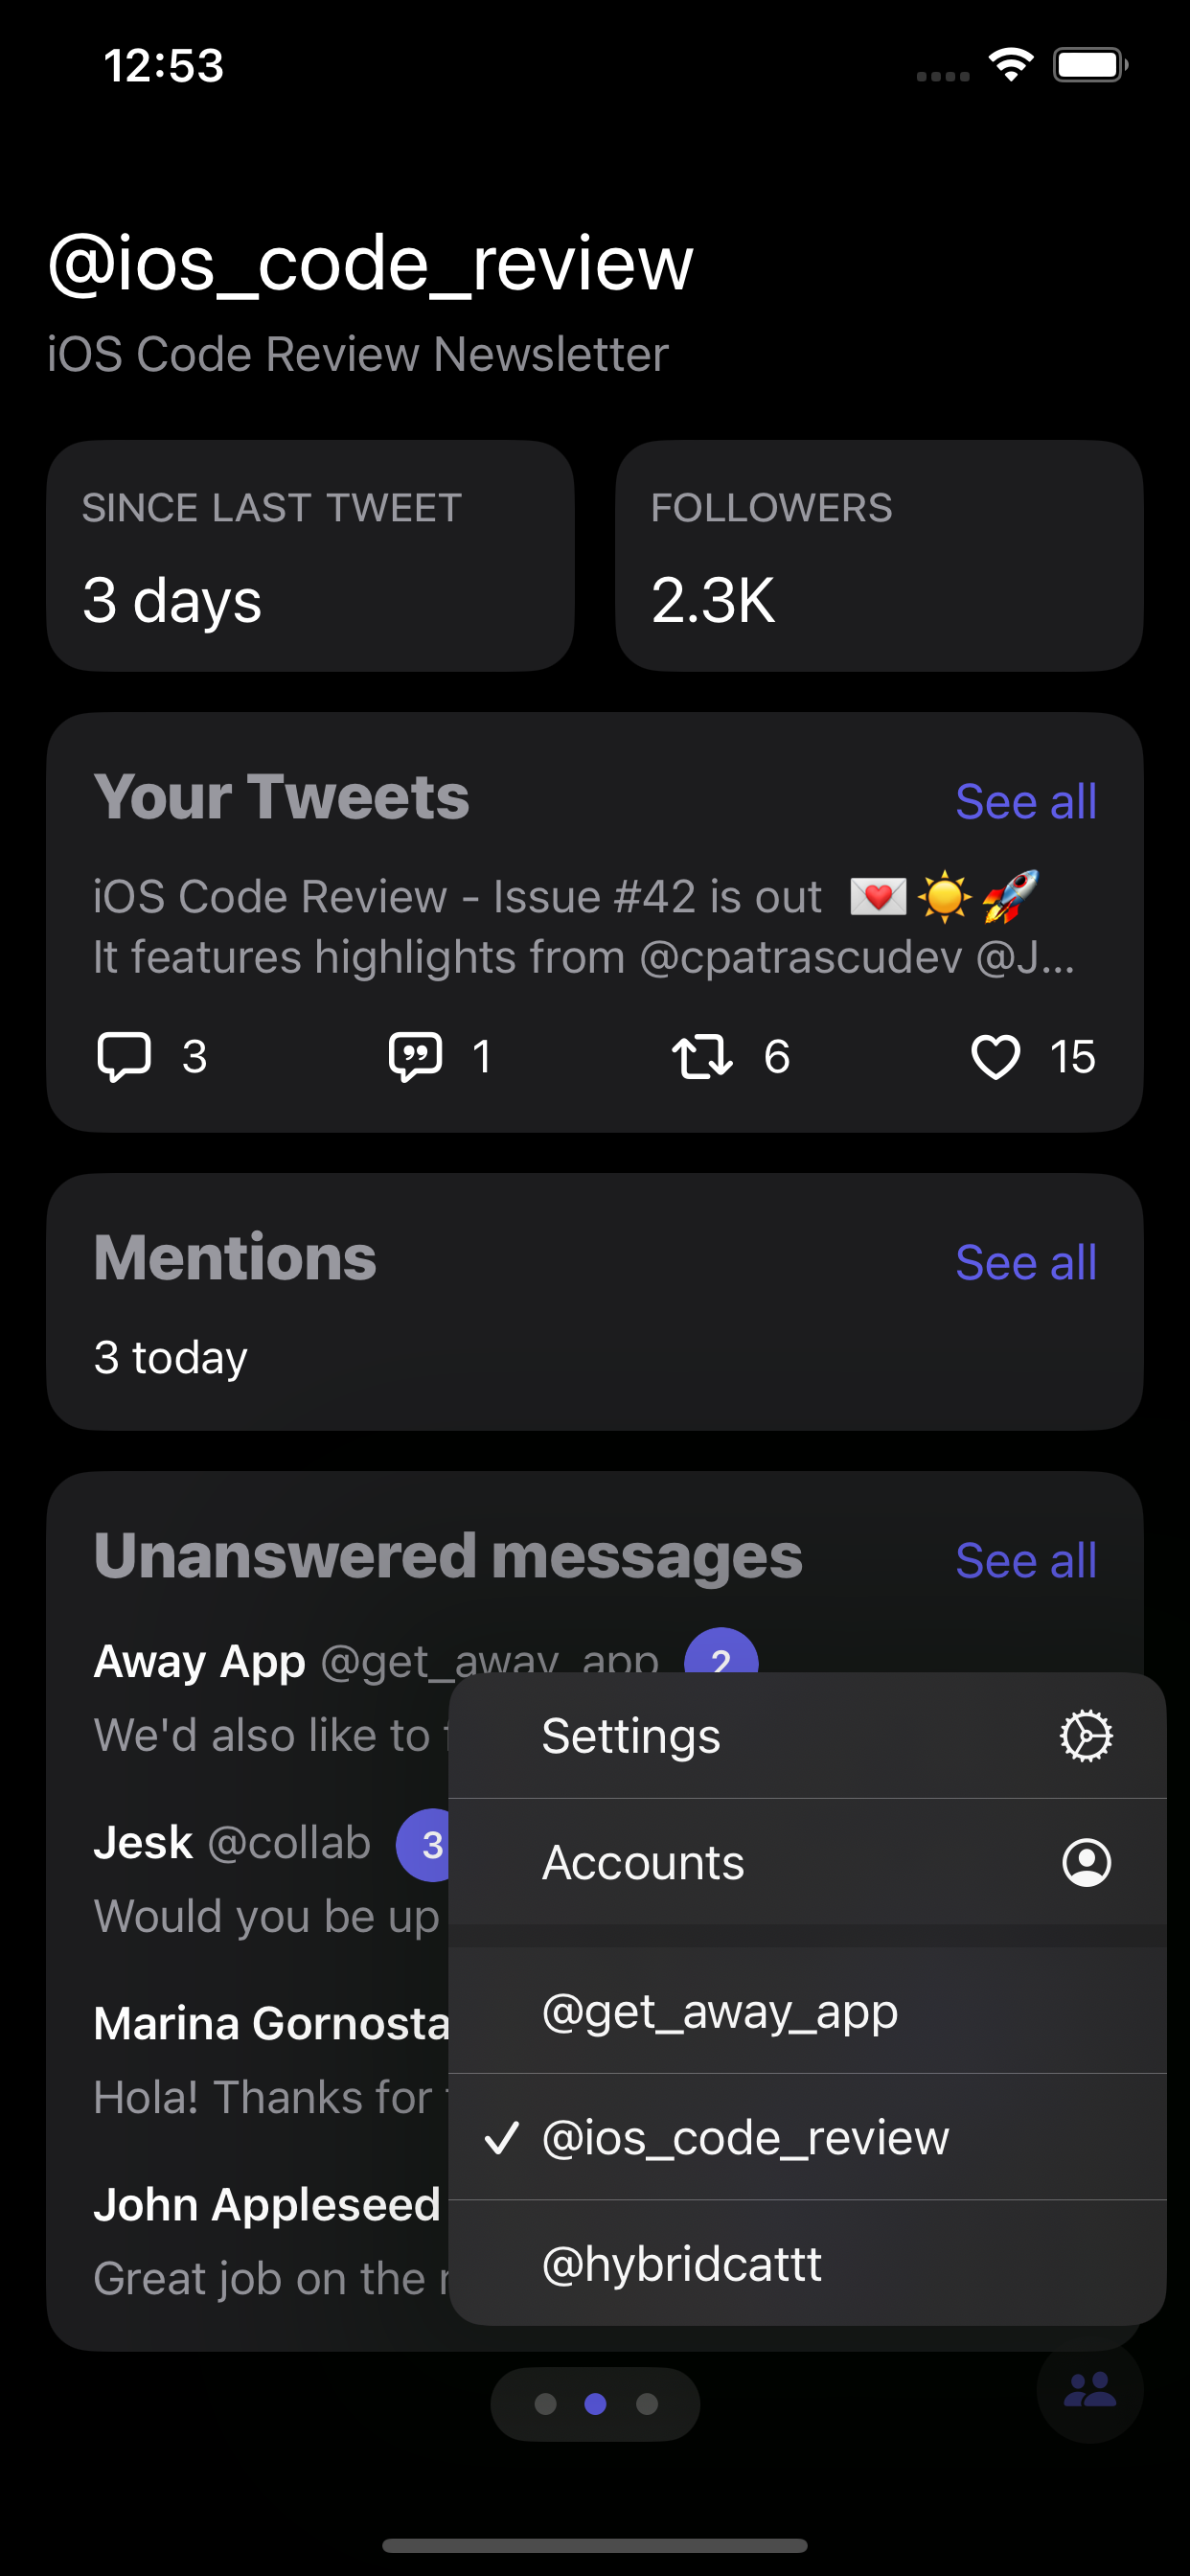 Away for iOS shows your new Twitter DMs, statistics for recent tweets, number of followers